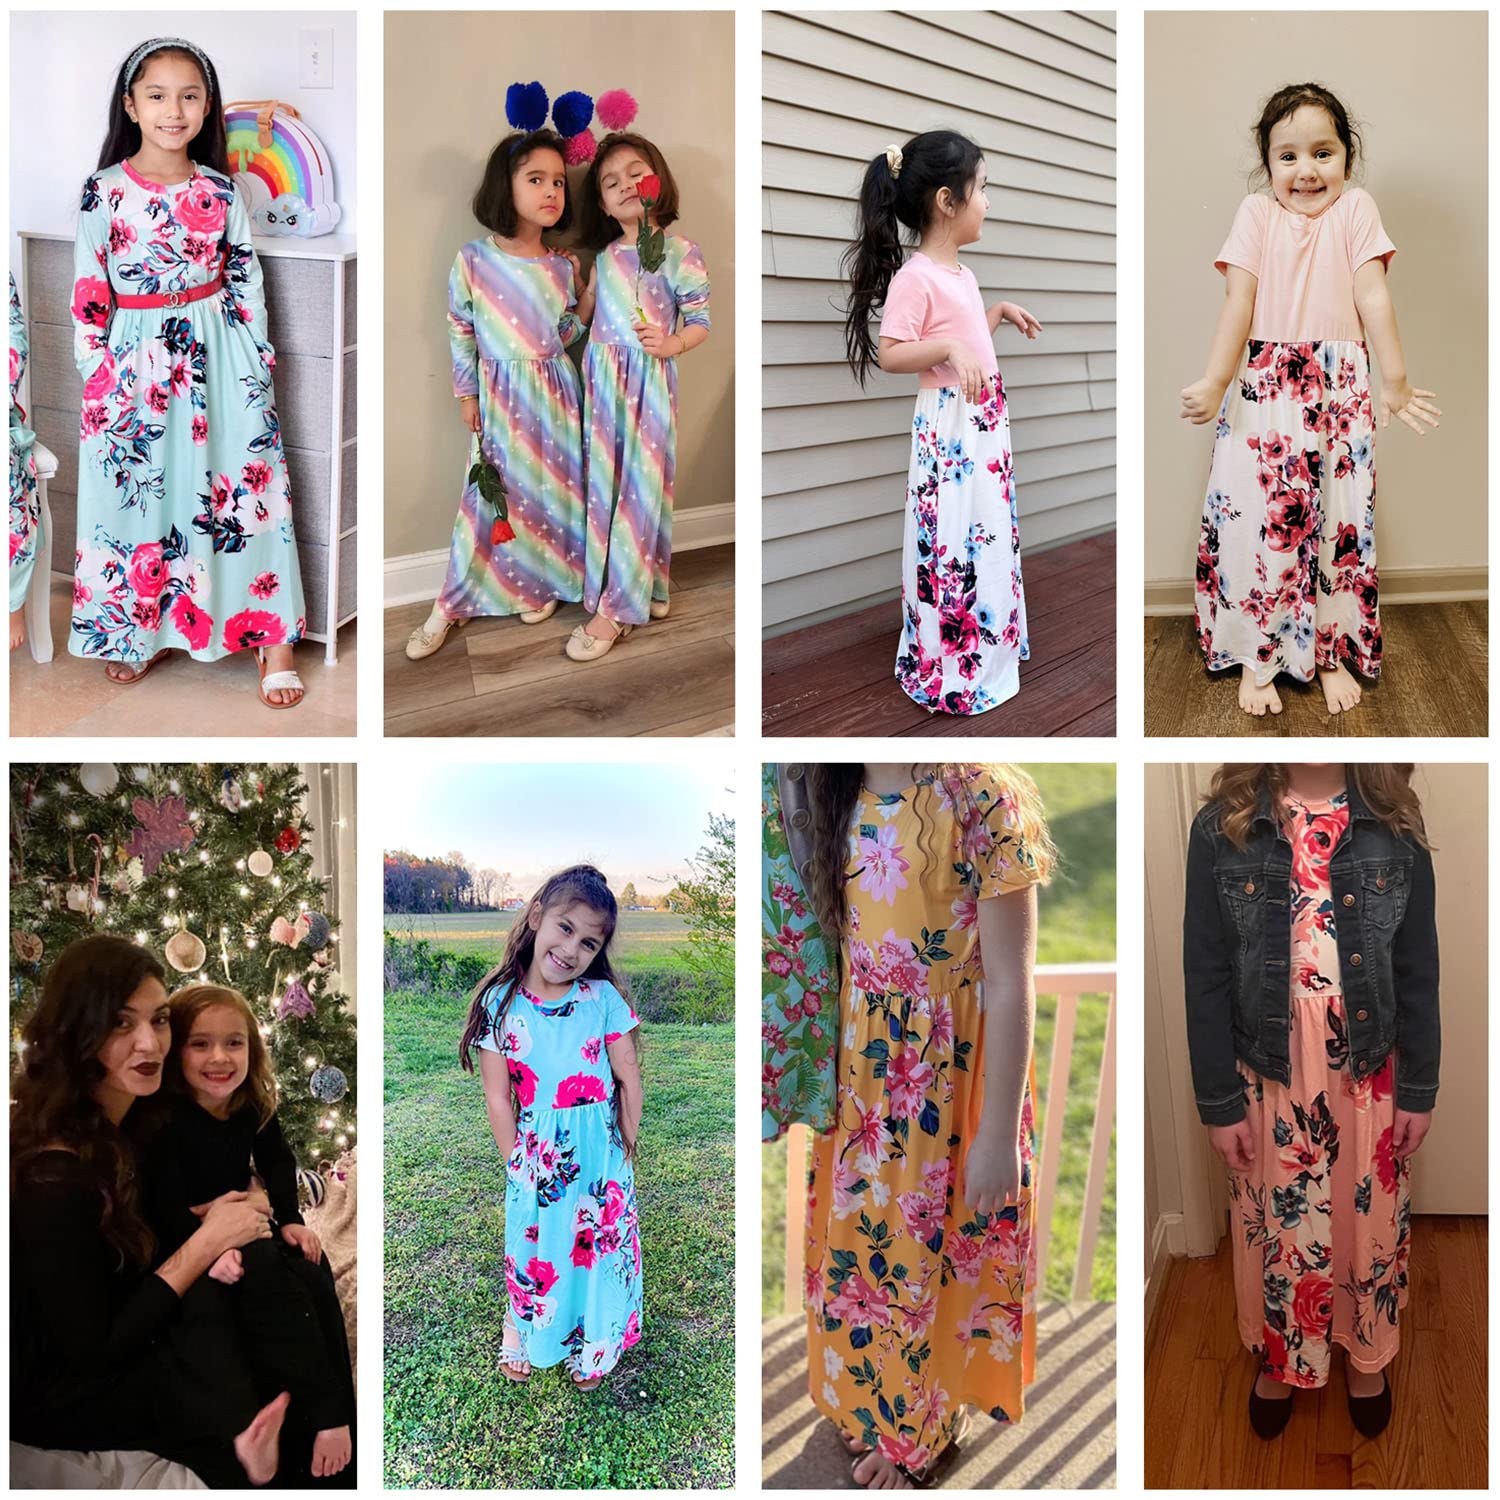 storeofbaby Girls Casual Maxi Floral Dress Long Sleeve Holiday Pockets Dresses for 5-13 Years